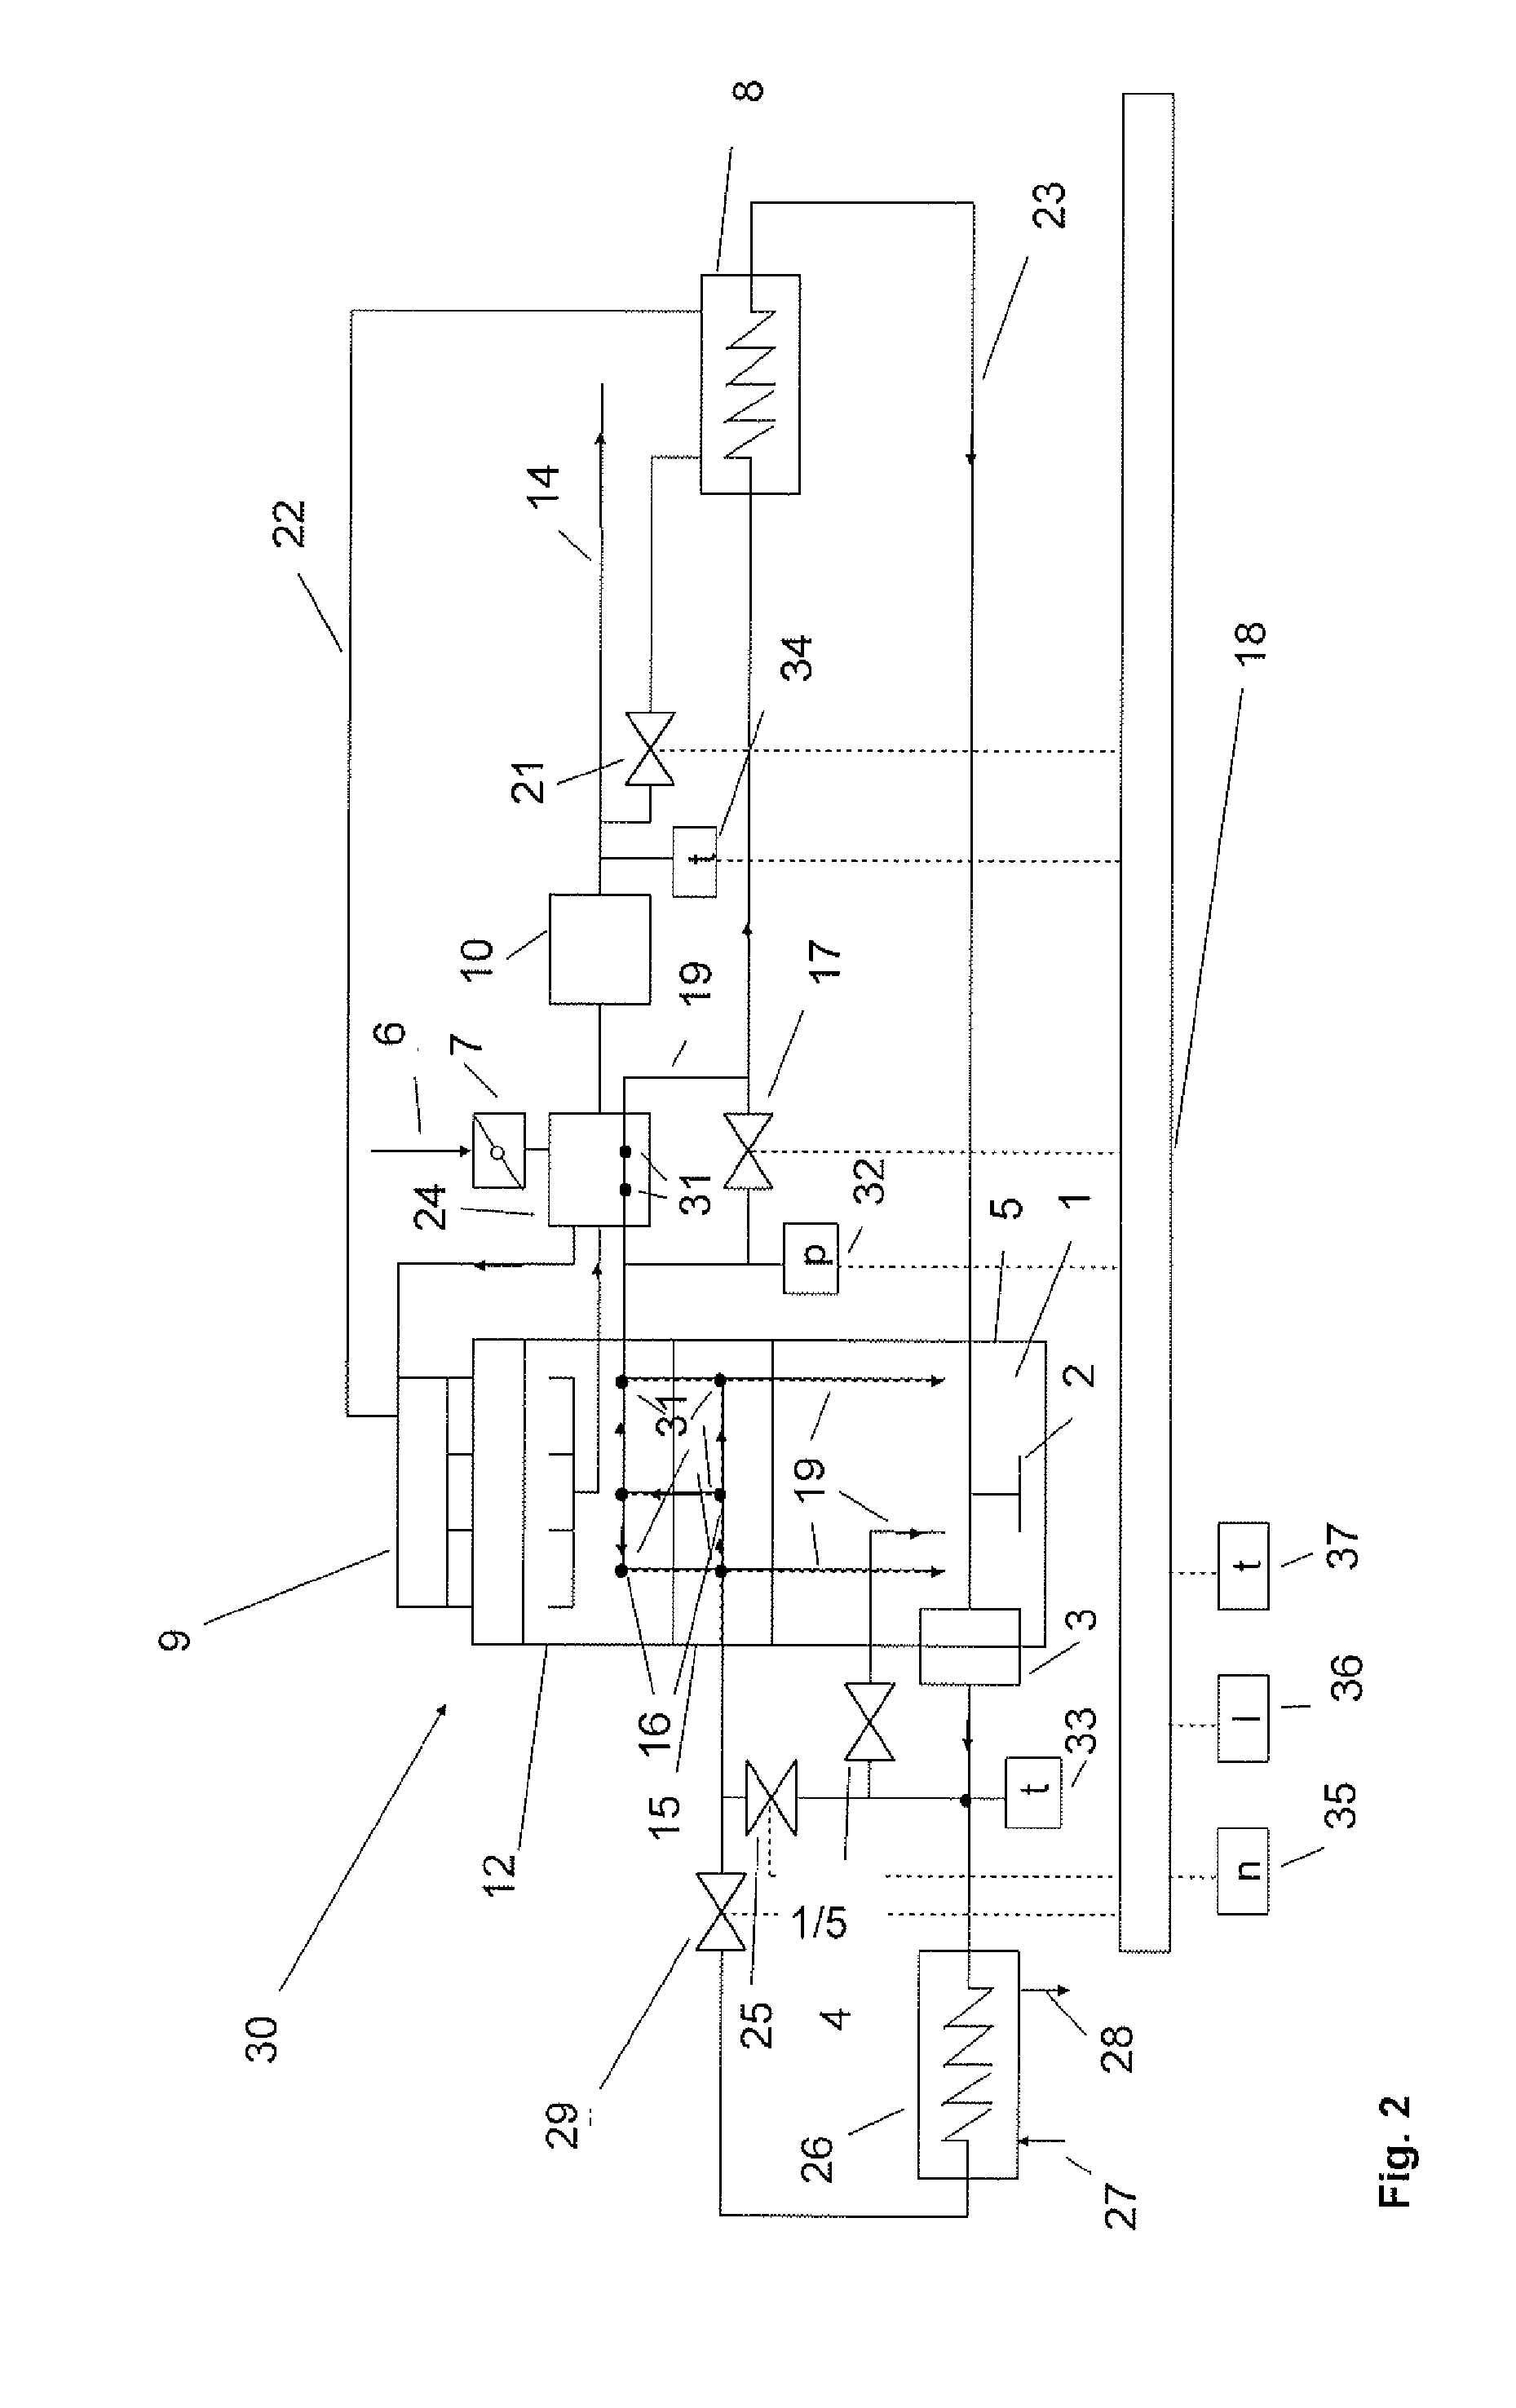 Method and apparatus for oiling rotating or oscillating components